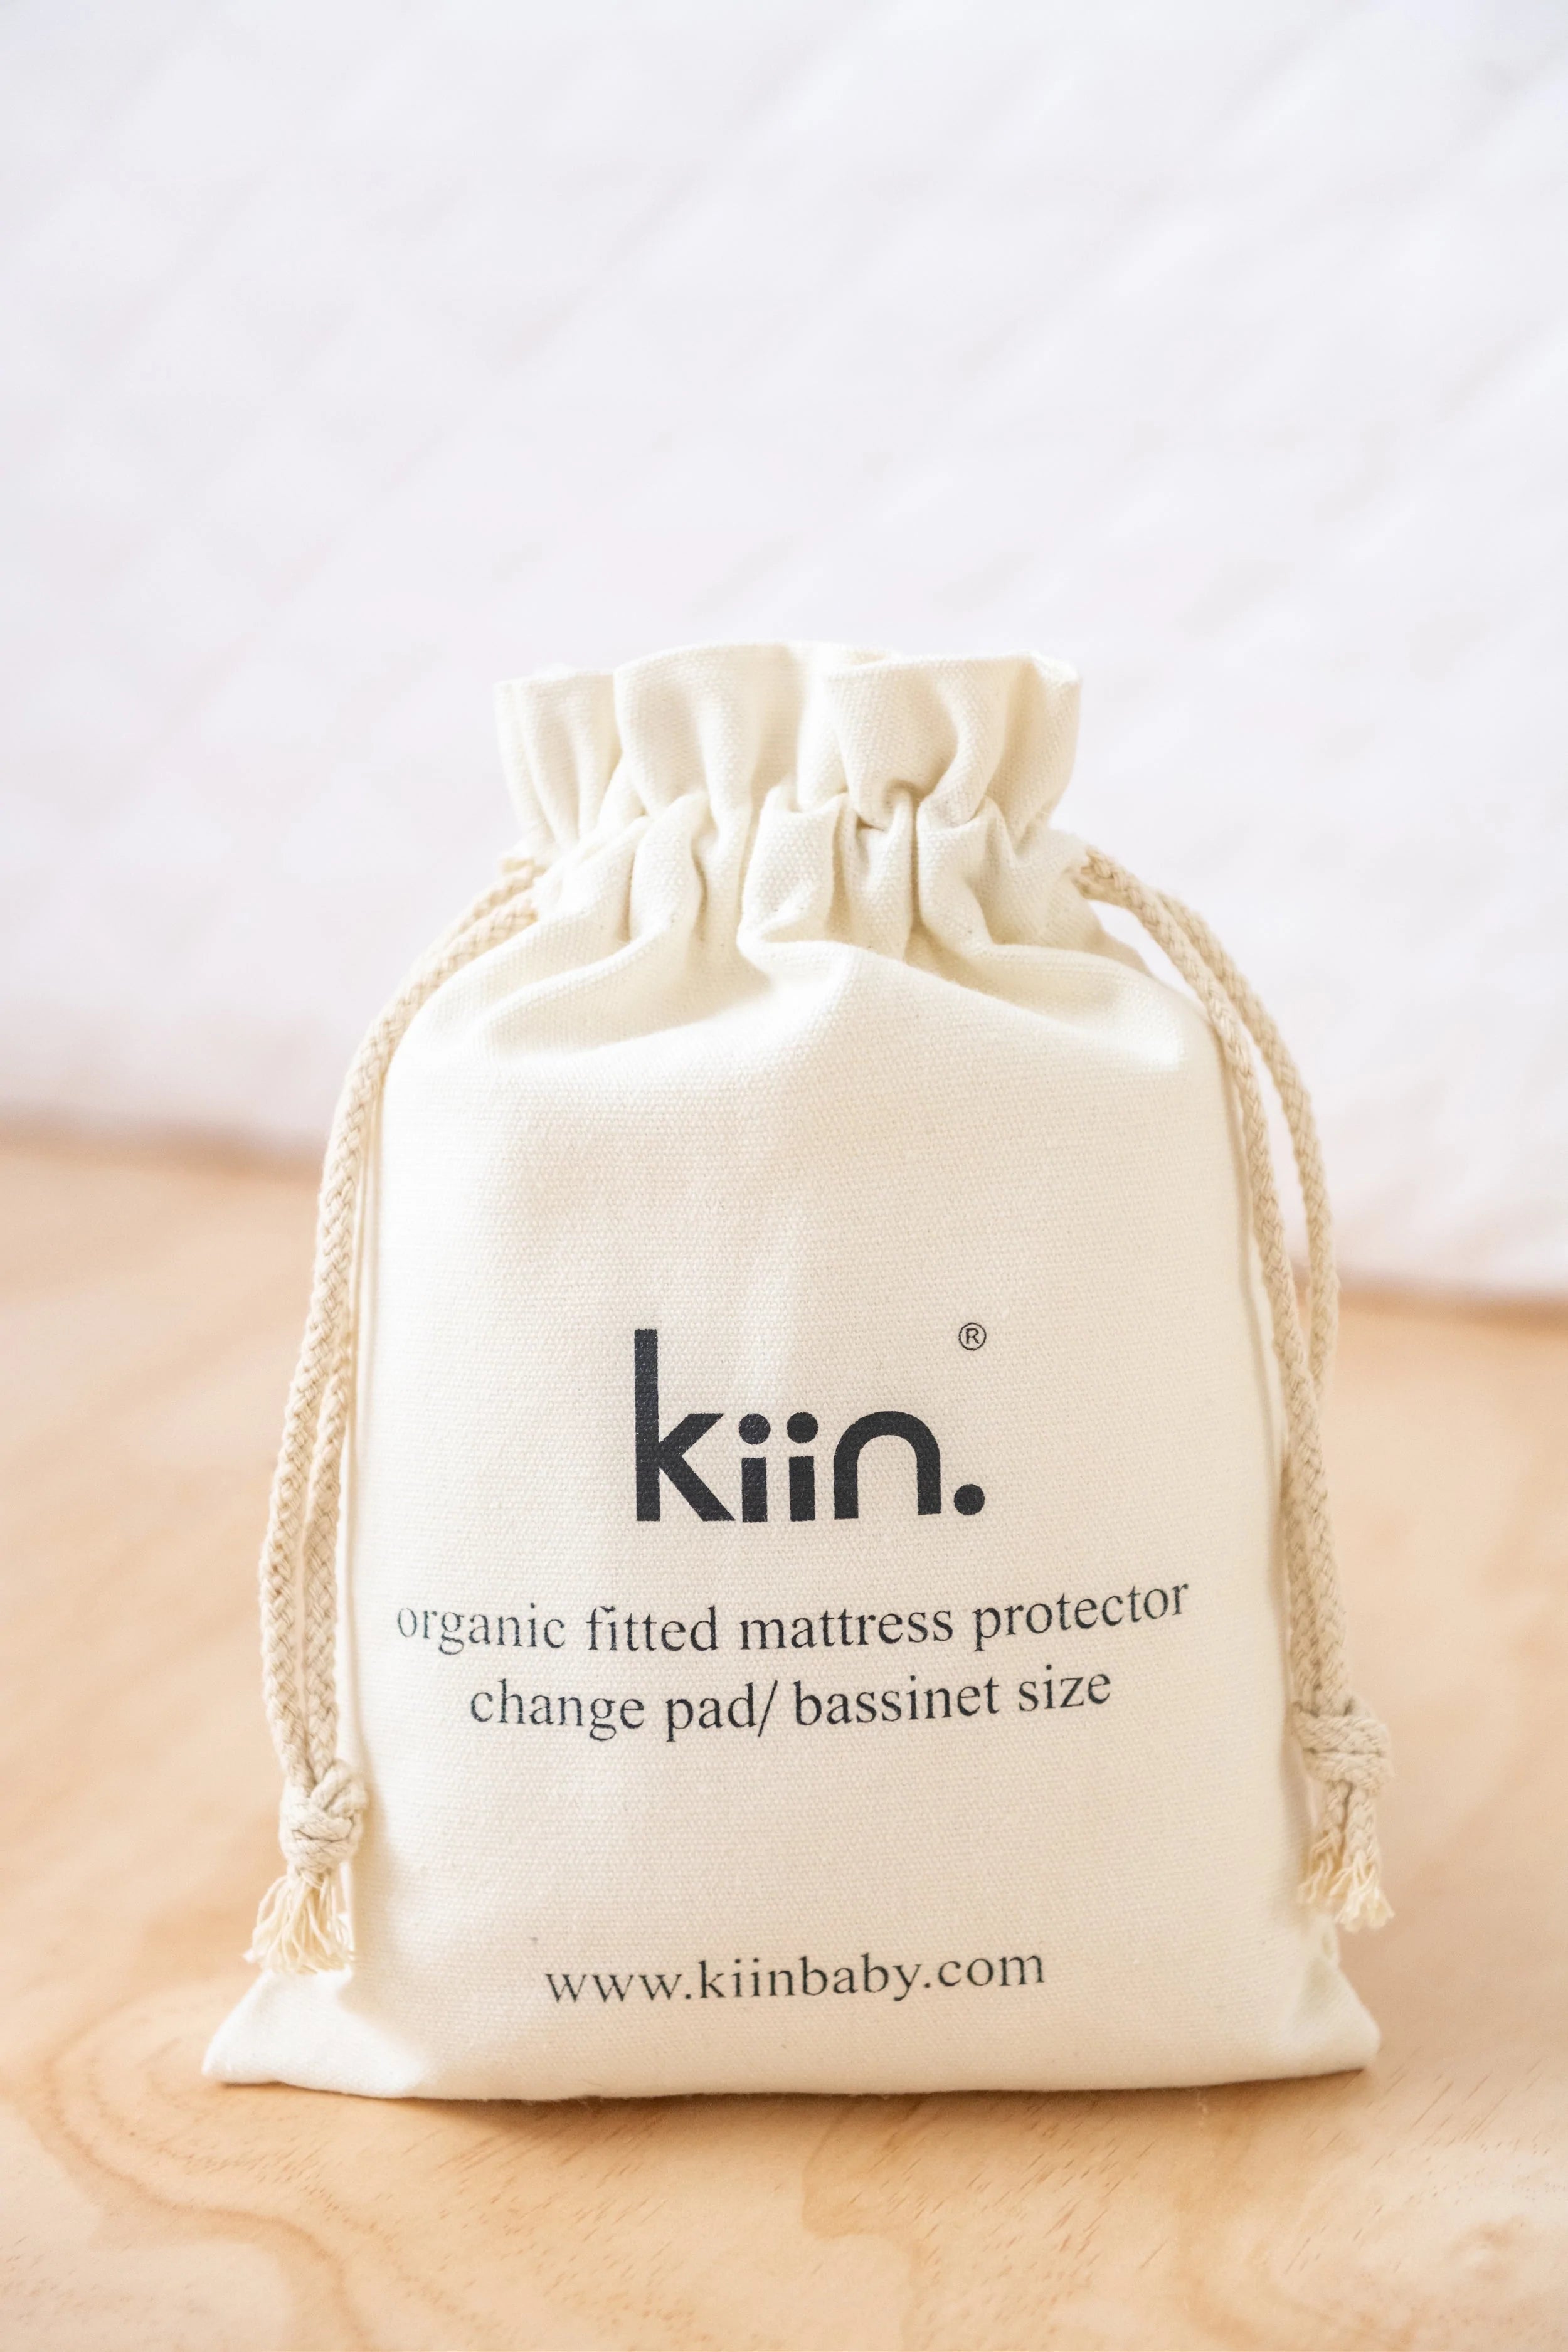 Kiin | Organic Fitted Mattress Protector | 3 Sizes